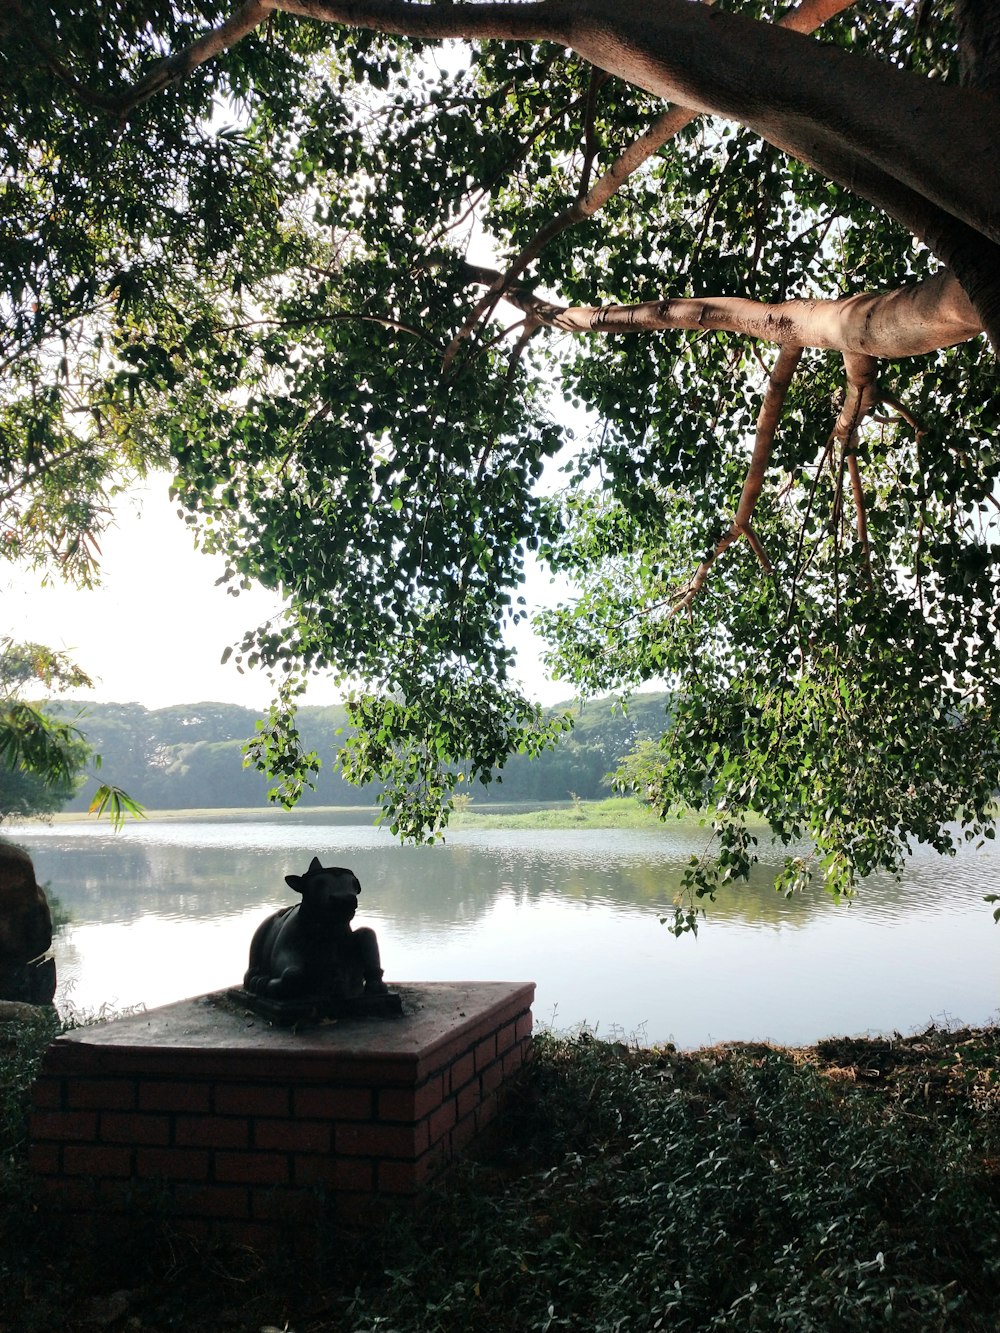 a statue of a dog sitting under a tree next to a body of water